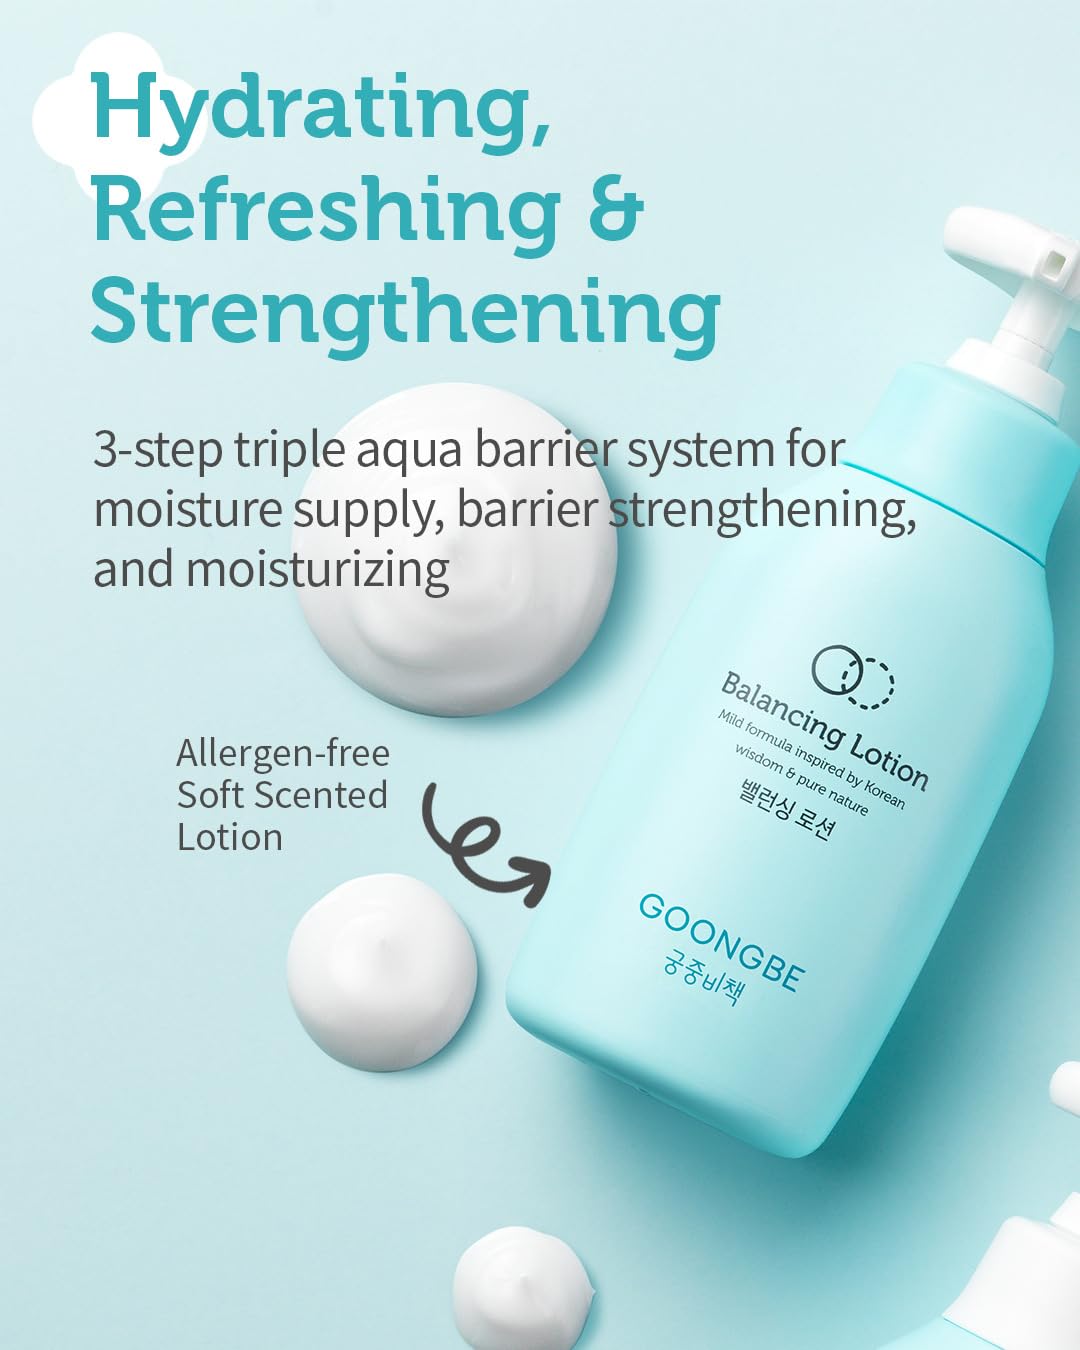 250ml GOONGBE Balancing Lotion, specially formulated for kids' skin with gentle care in mind.